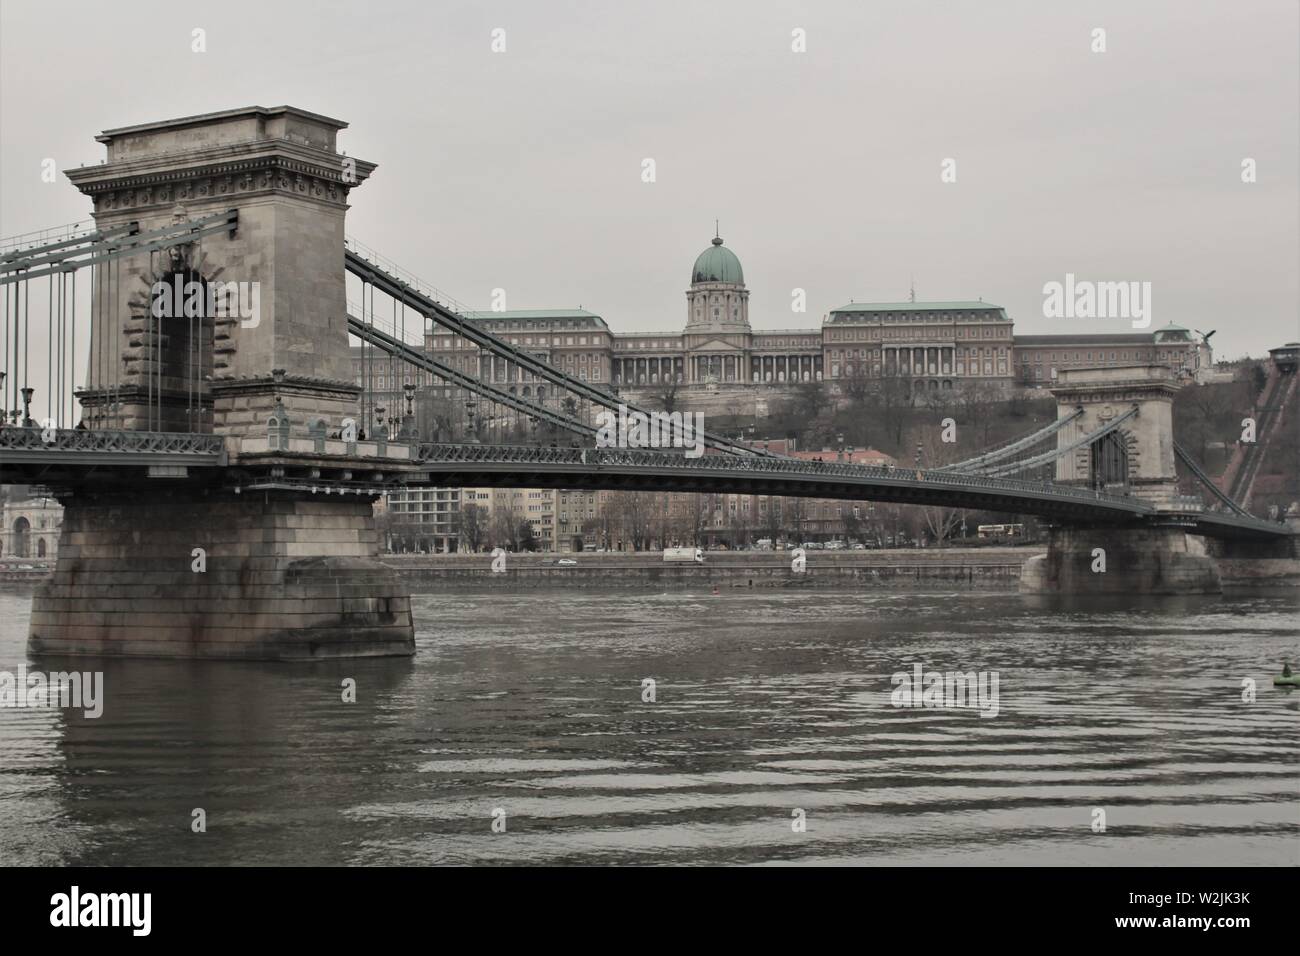 A view of the Széchenyi Lanczhid chain bridge and the Royal Palace of Buda Castle, taken from the Pest side of the river Danube. Stock Photo